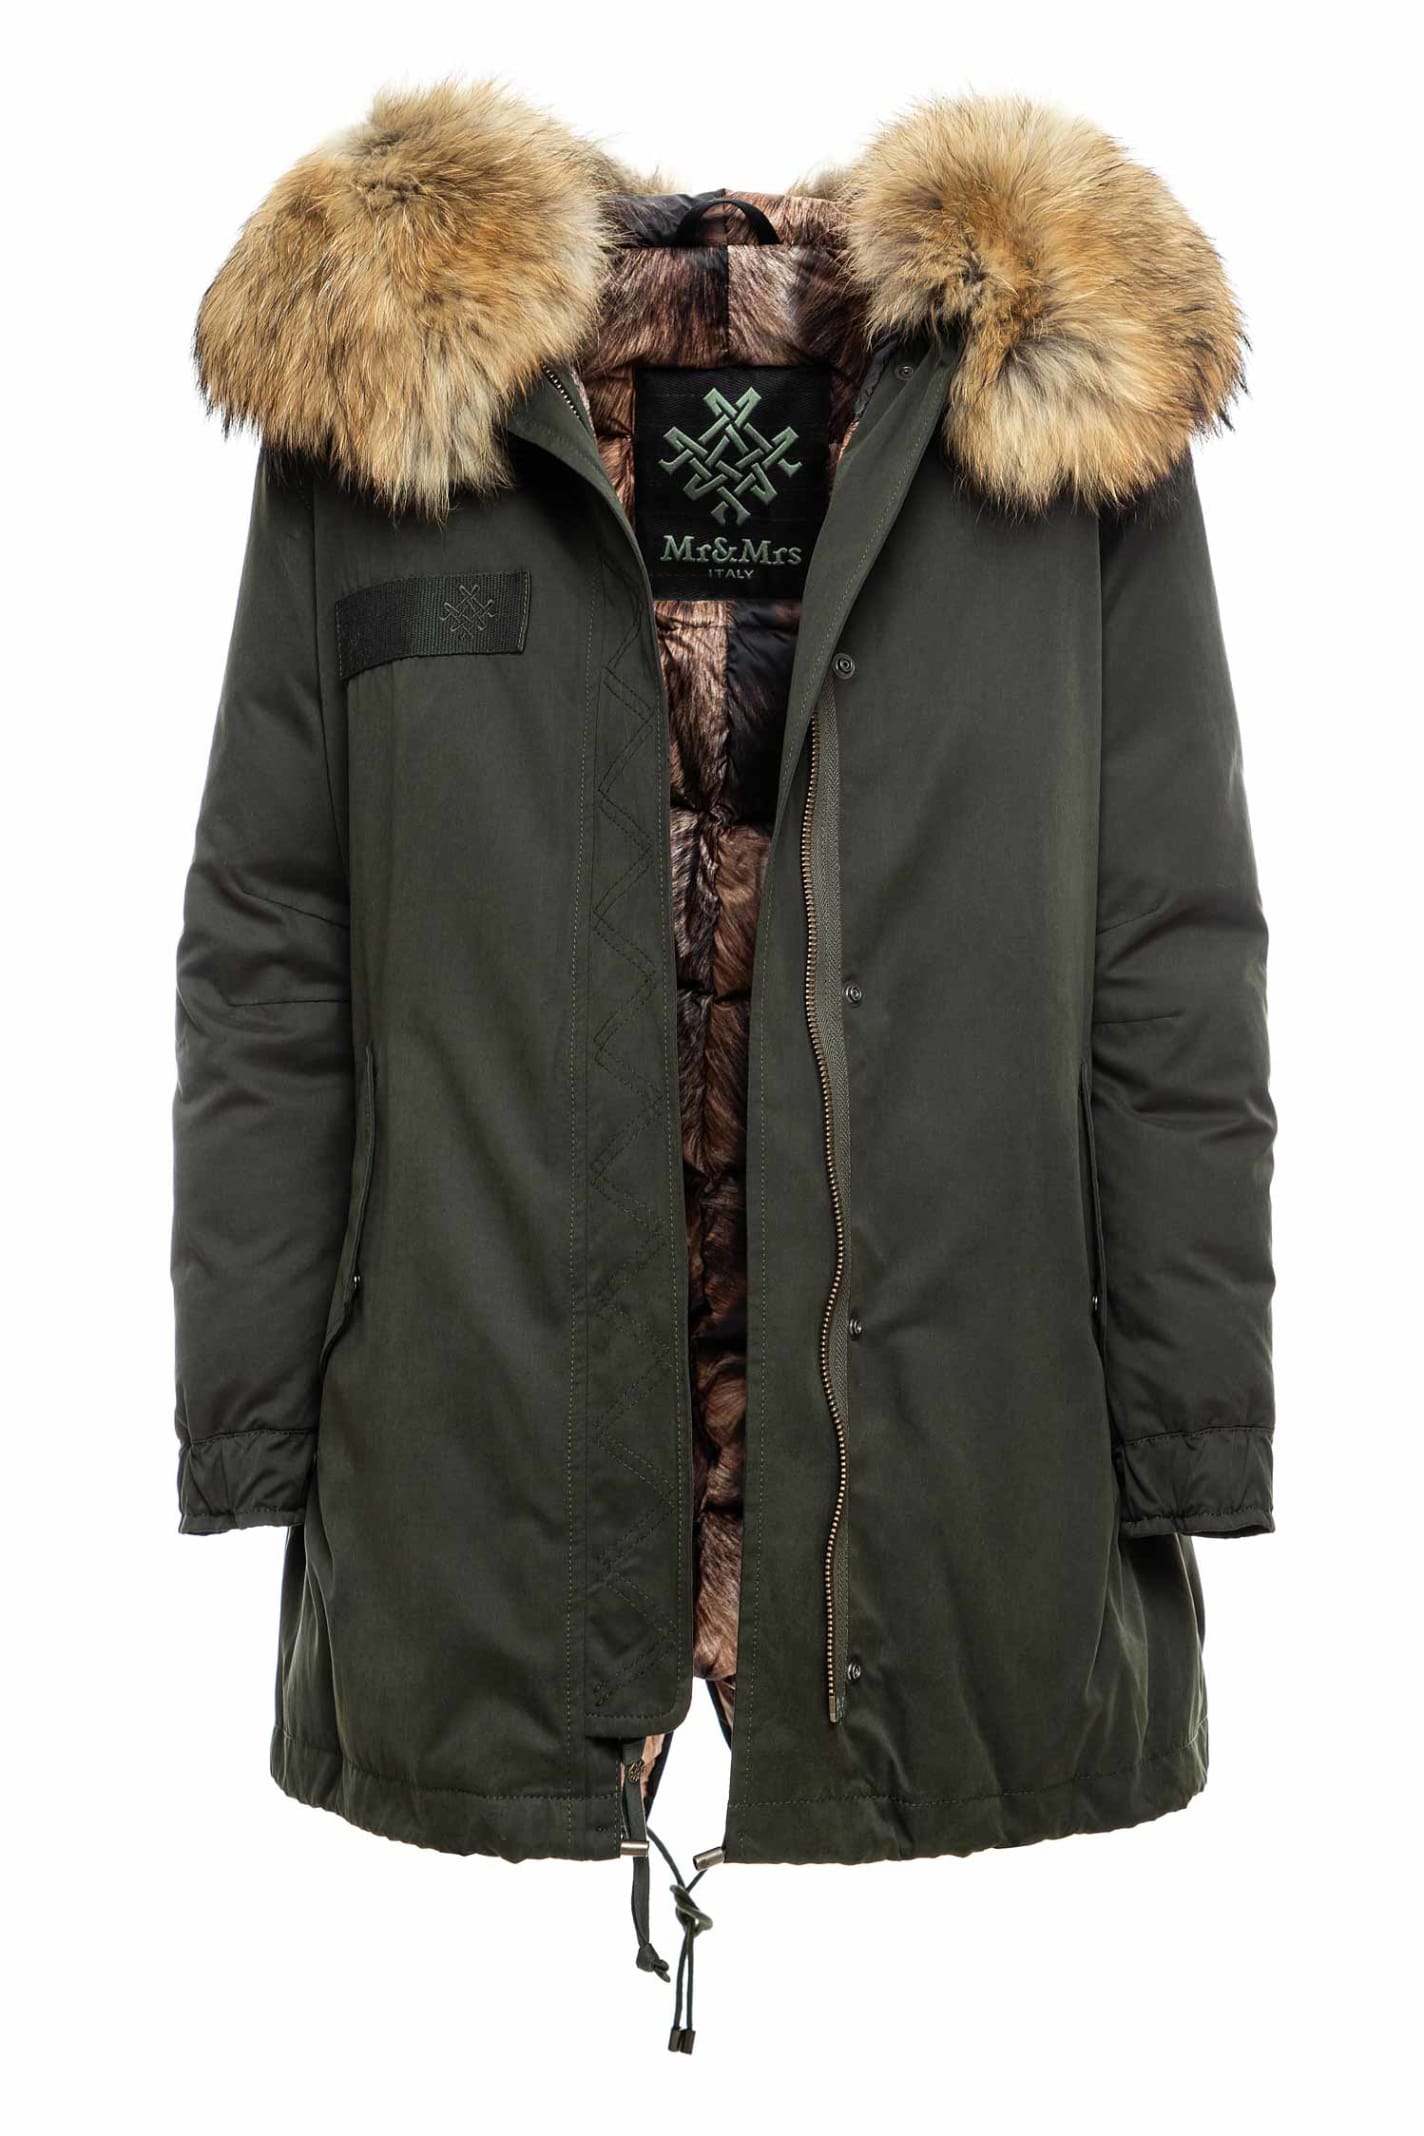 Mr & Mrs Italy Parka A-line With Fur And Padded Lining